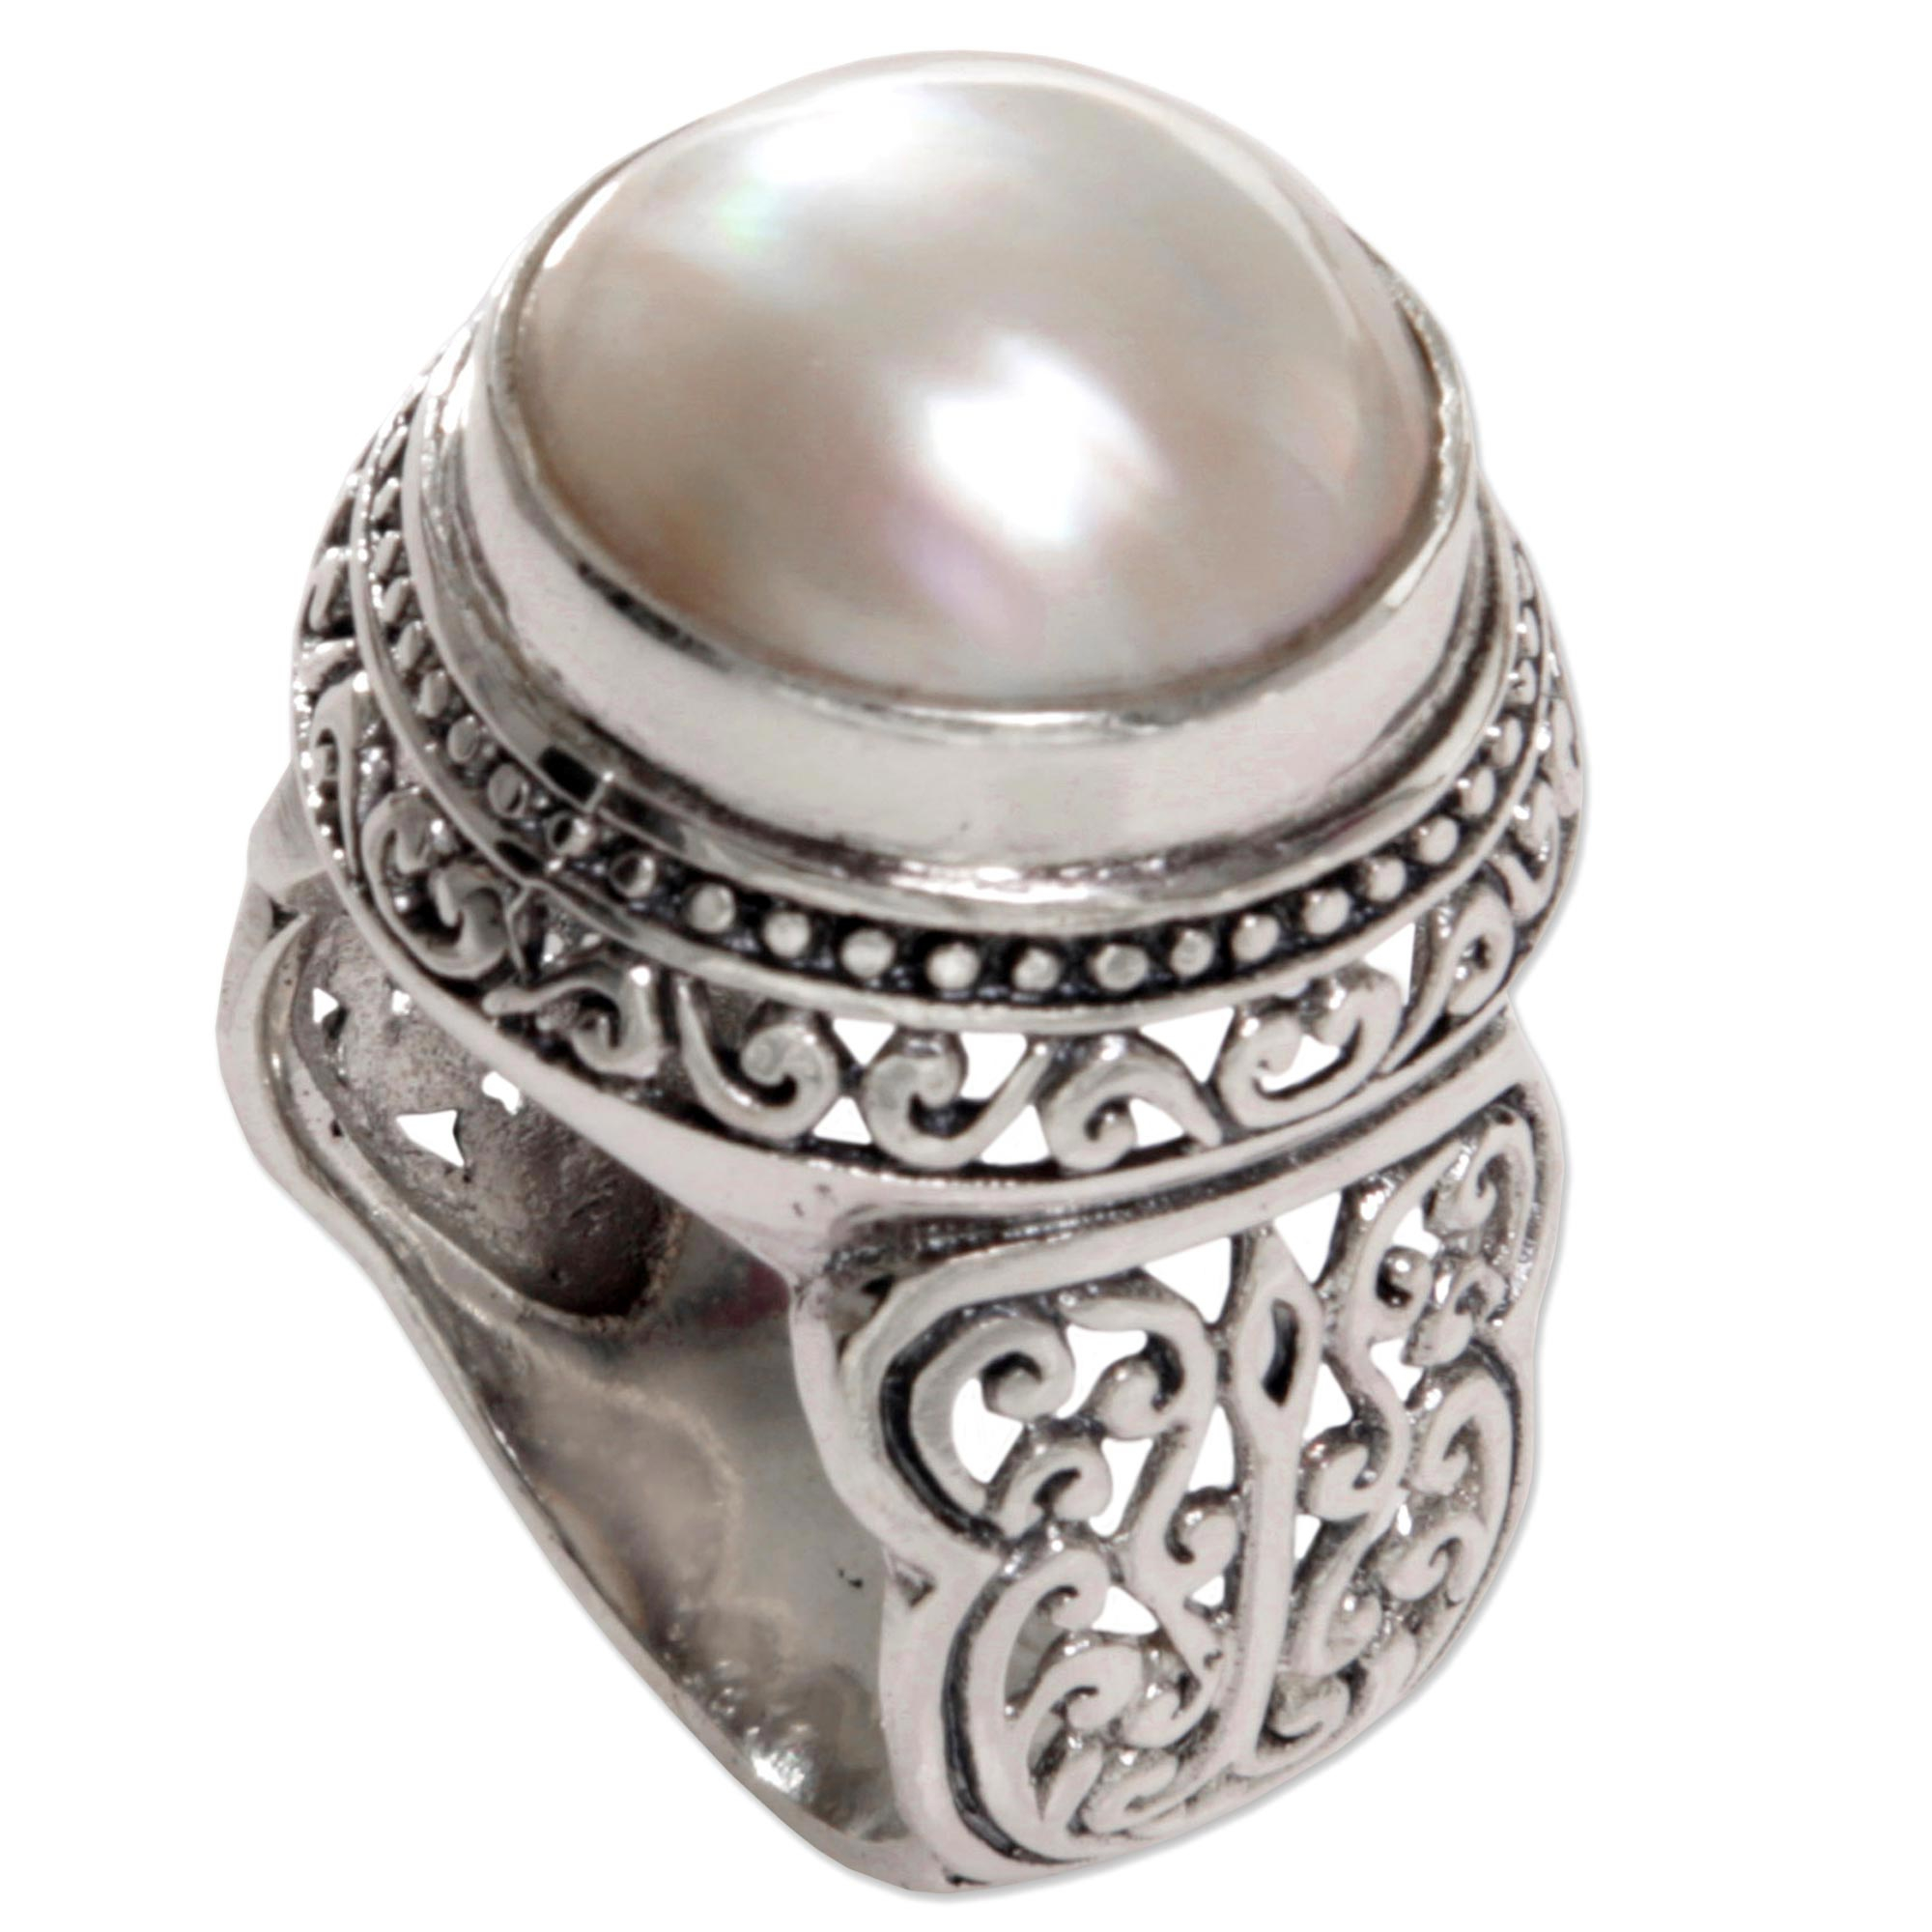 Cultured Mabe Pearl Ring Hand Crafted in Indonesia - Royal Dome | NOVICA